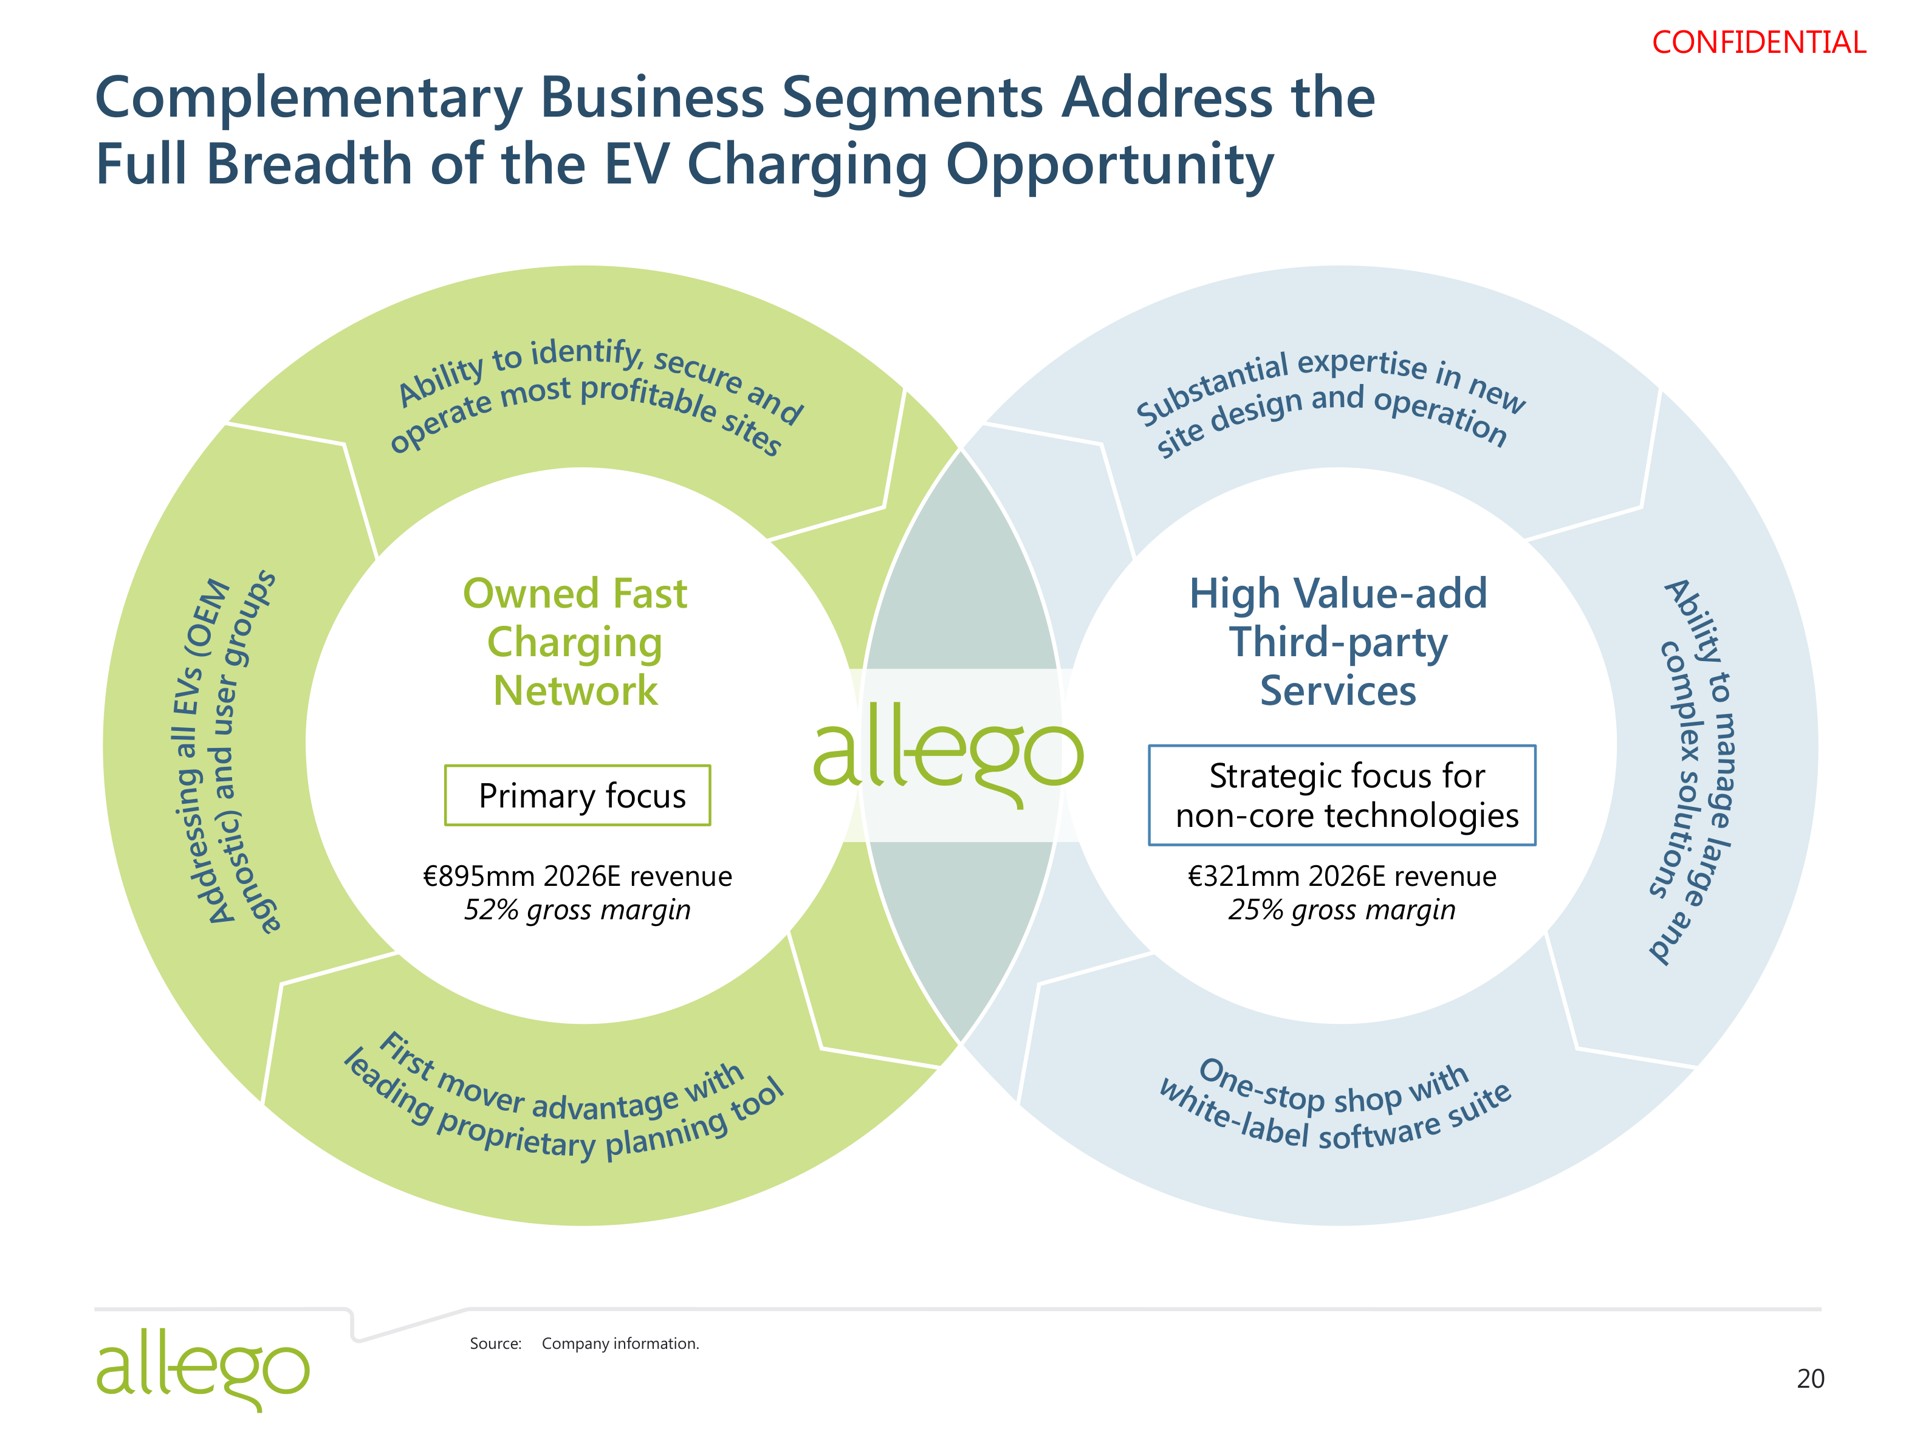 complementary business segments address the full breadth of the charging opportunity | Allego